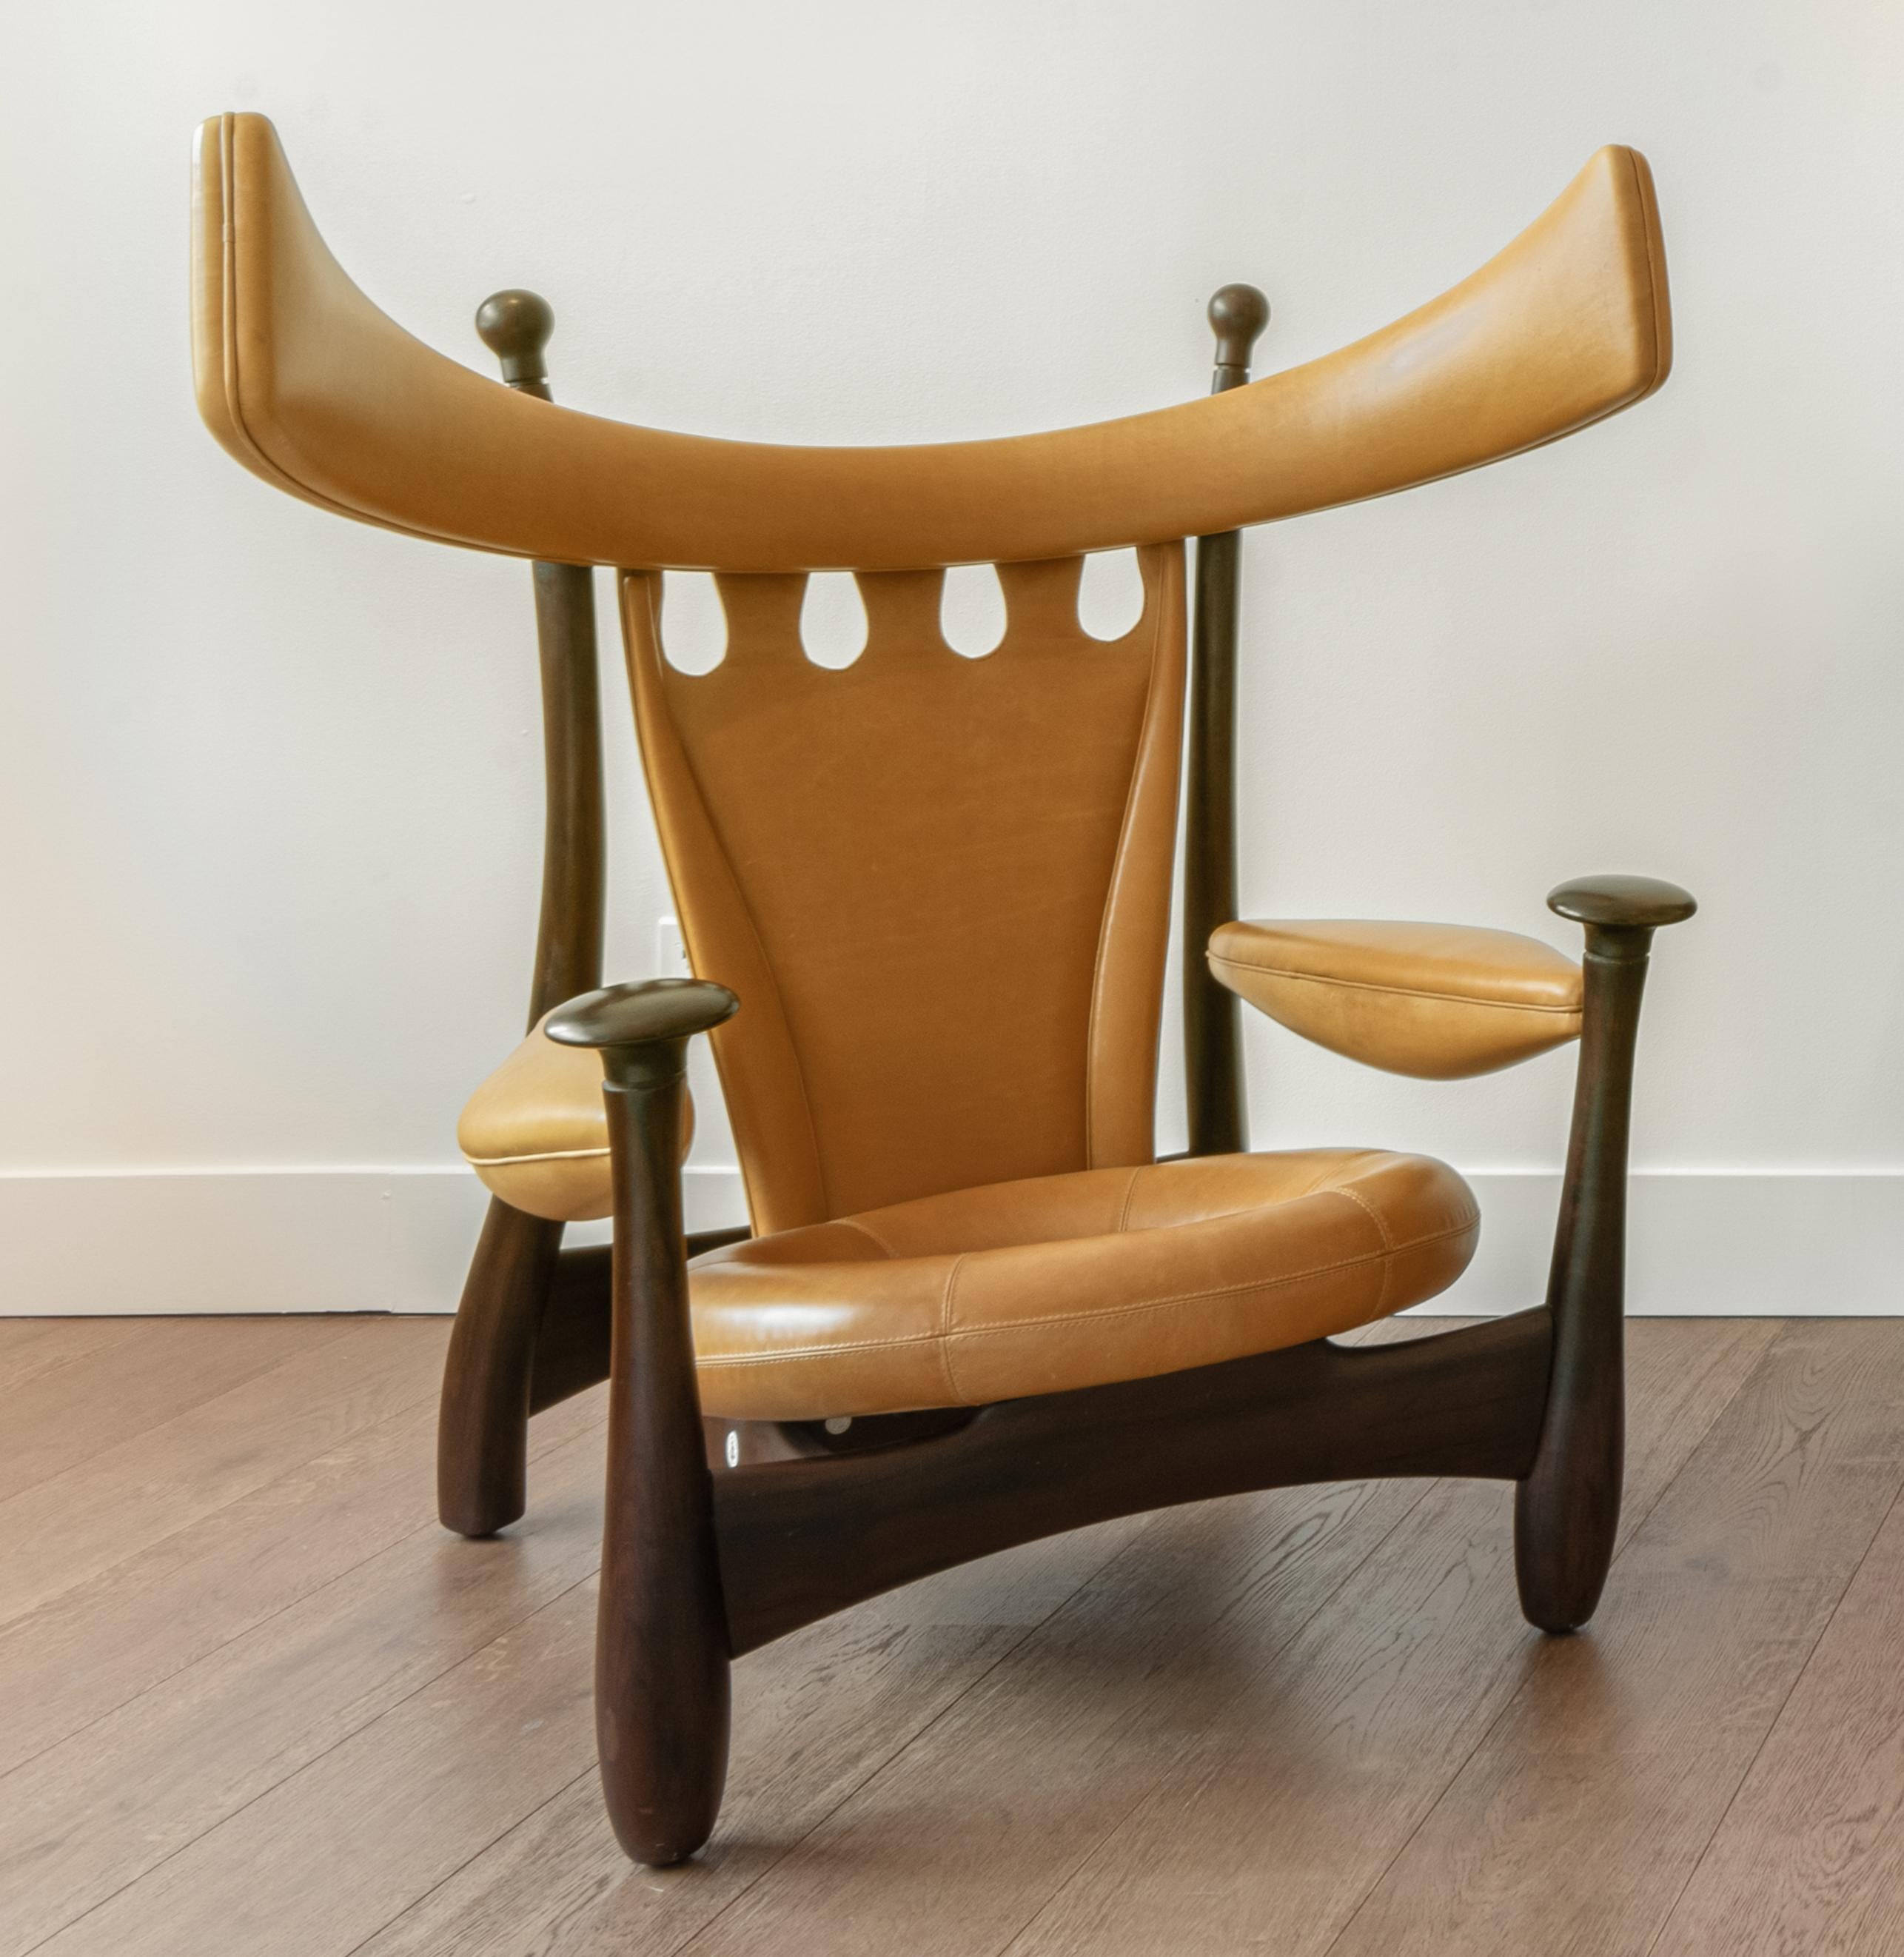 Originally upholstered in red leather, this chair is from an edition of 40 sold exclusively by Espasso NYC. The chair has been reupholstered in a soft cognac-colored leather. The frame is Imbuia wood. The chair is edition 12 of 40.

Initially